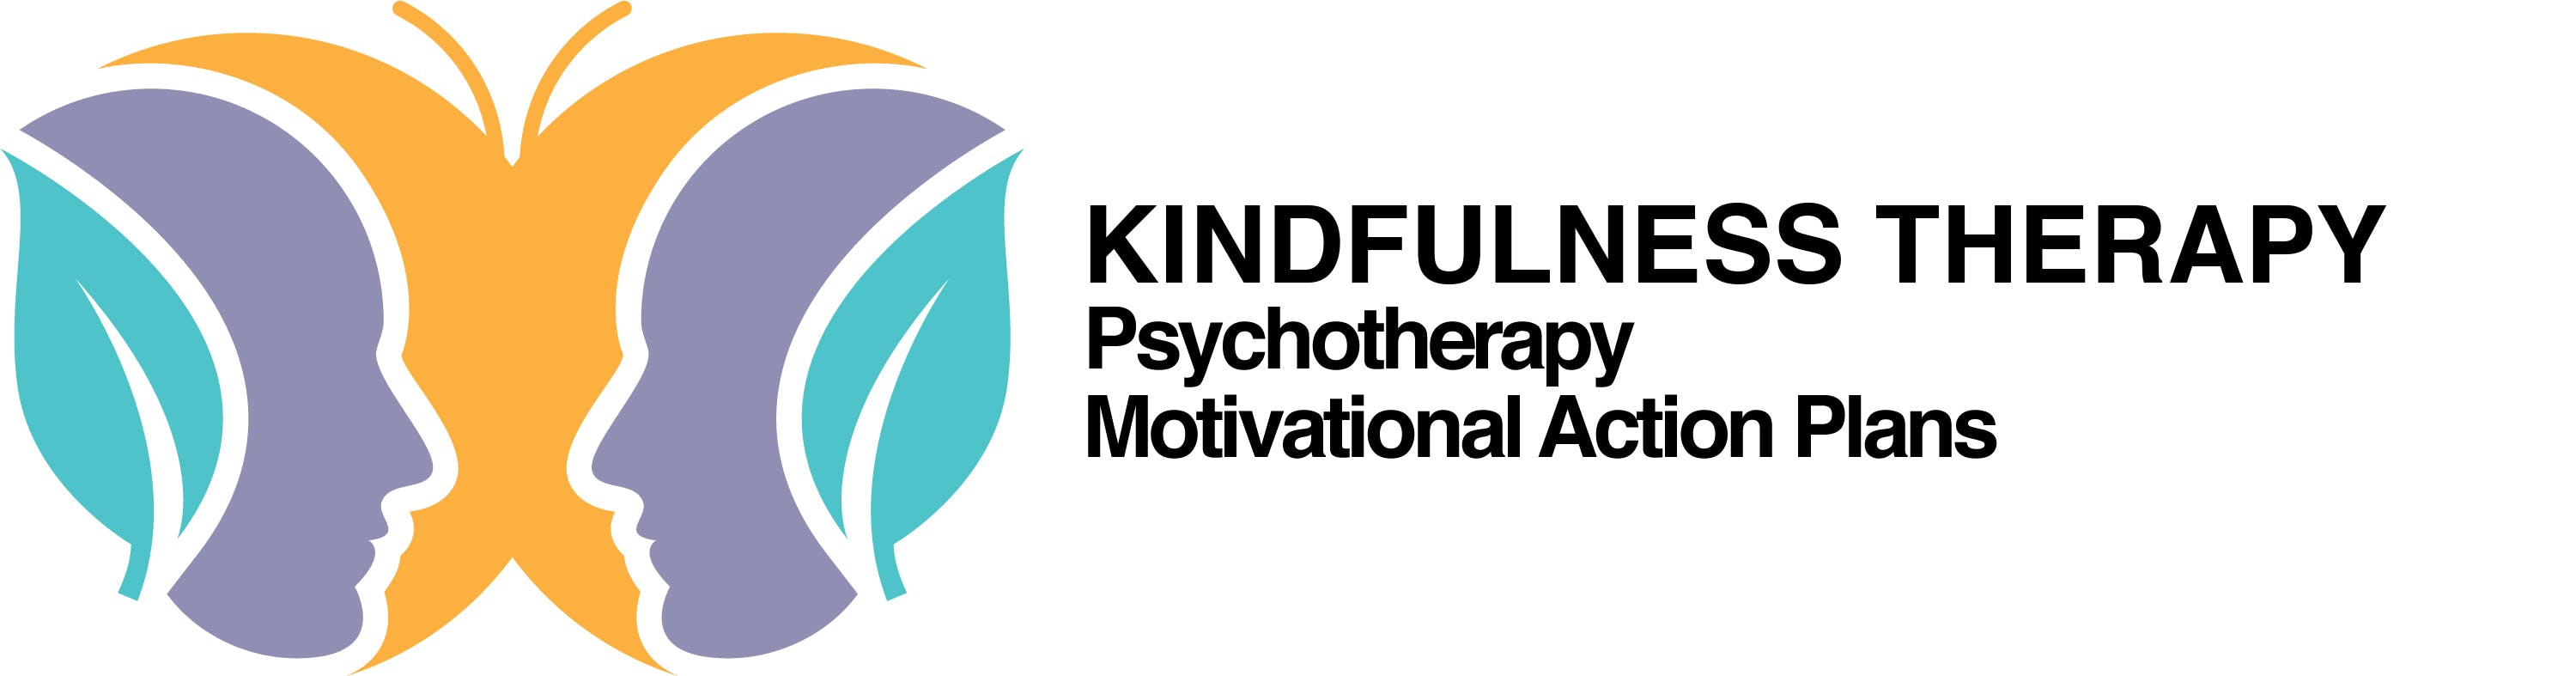 Kindfulness Therapy